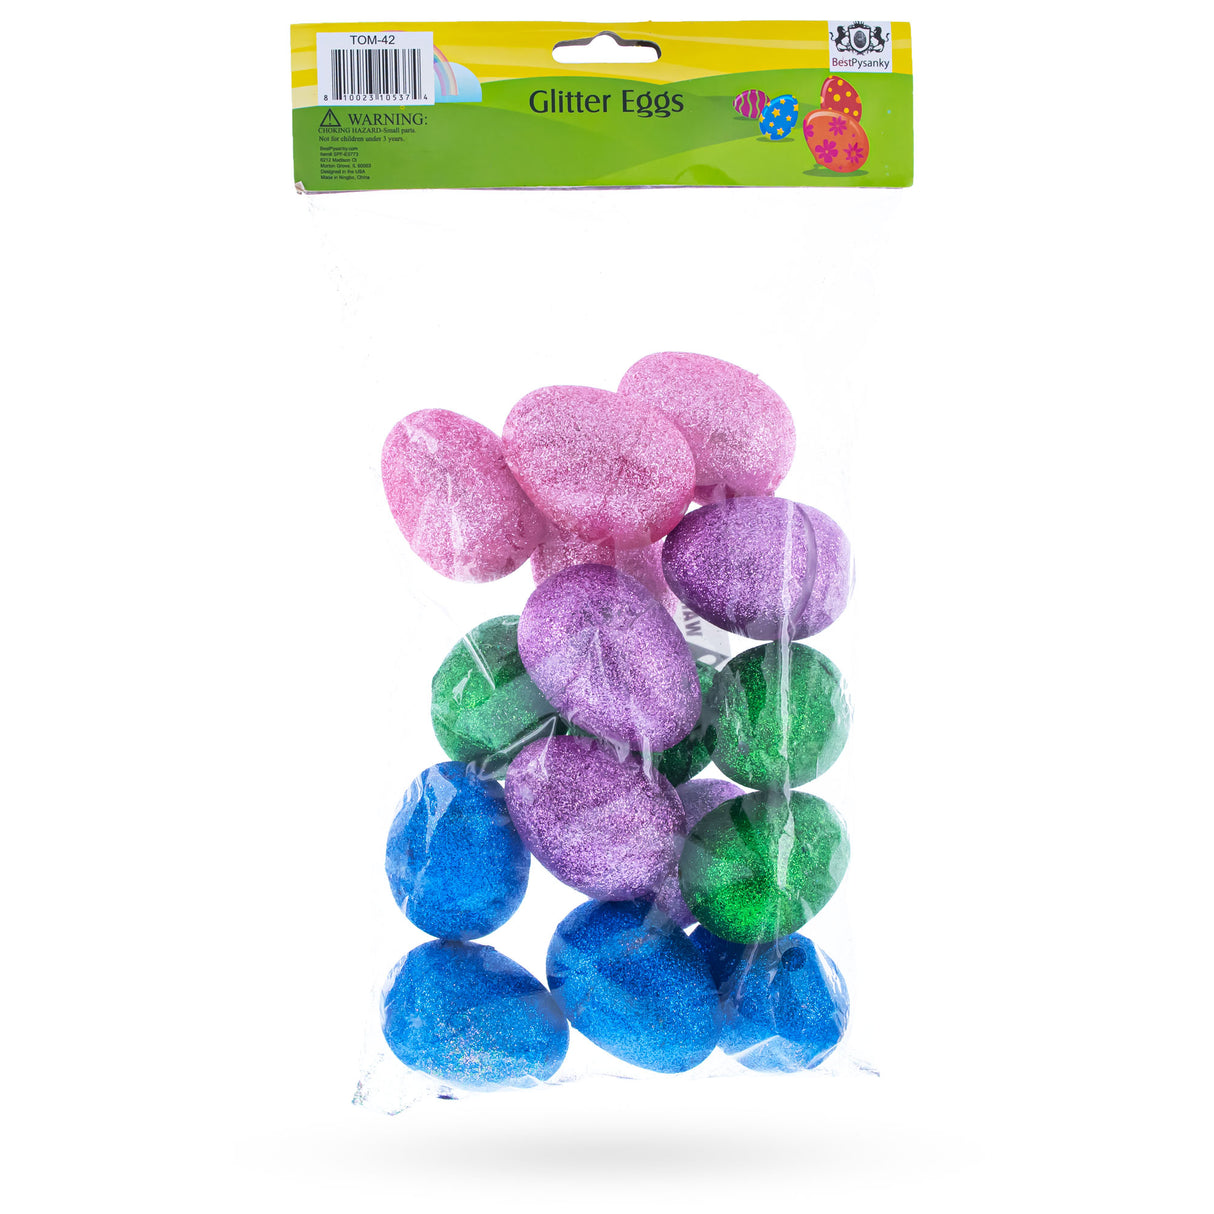 Radiant Easter Delight: Set of 16 Shiny Glittered Multicolored Plastic Easter Eggs, 2.3 Inches ,dimensions in inches: 2.3 x 13 x 1.7